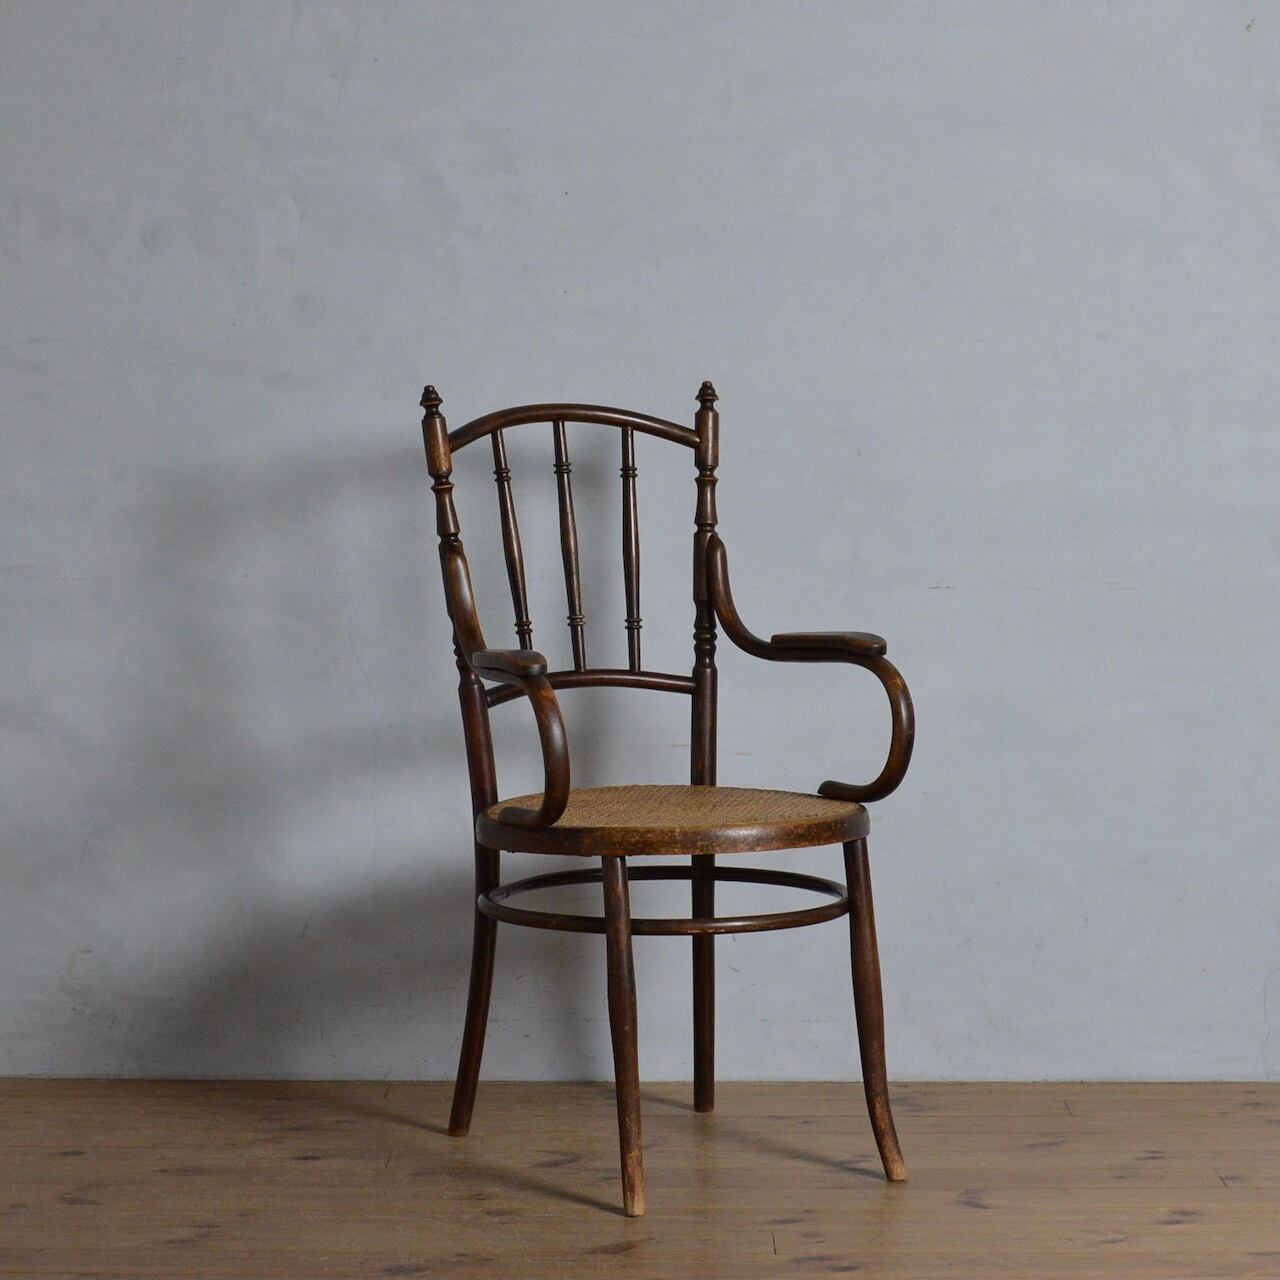 Bentwood Arm Chair / ベントウッド アーム チェア〈ダイニングチェア 